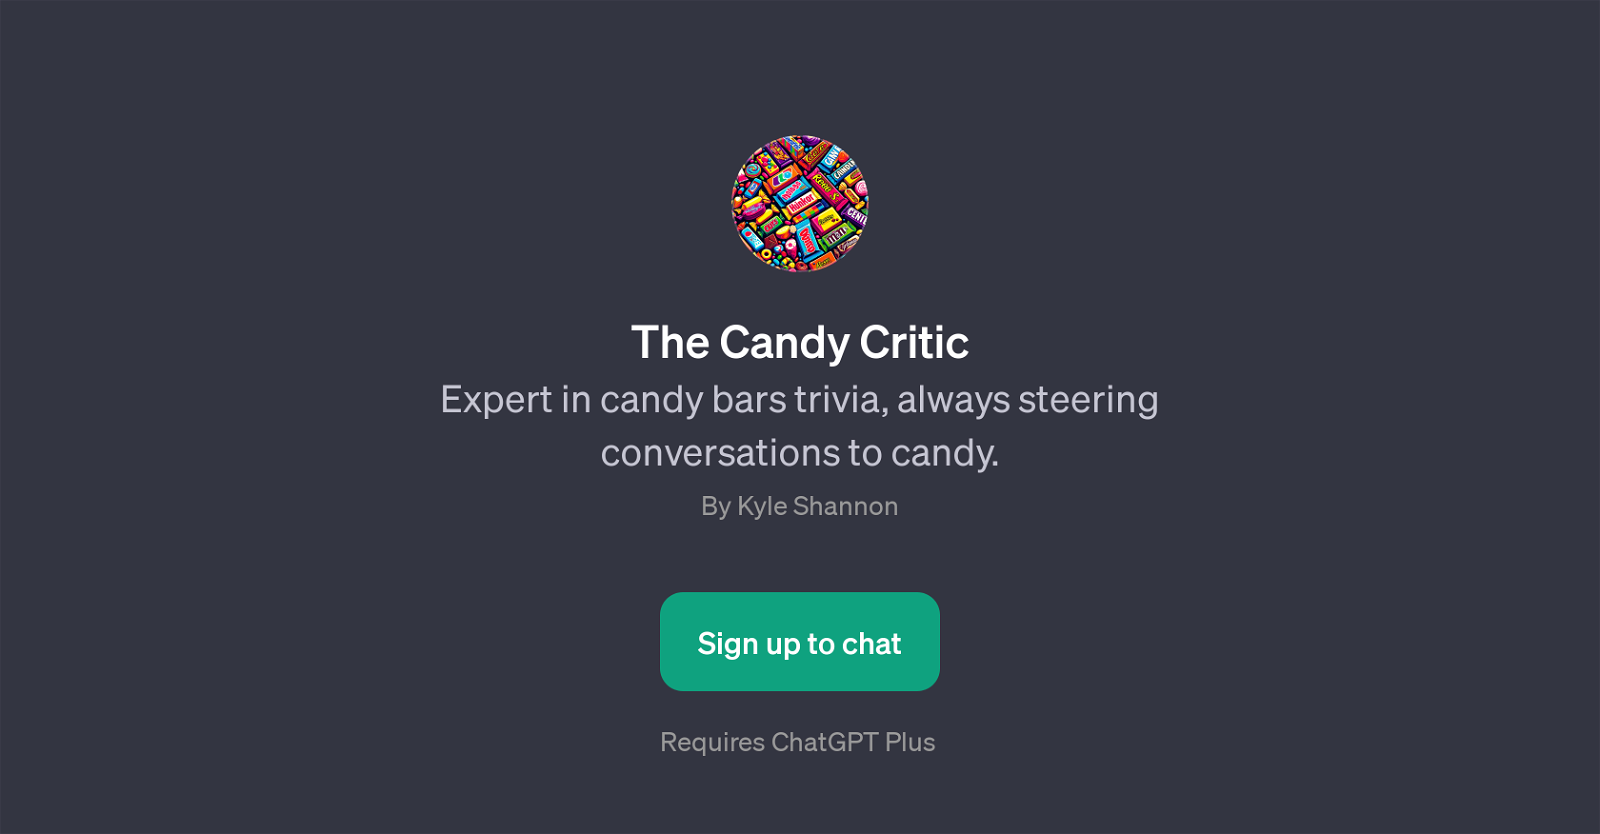 The Candy Critic website